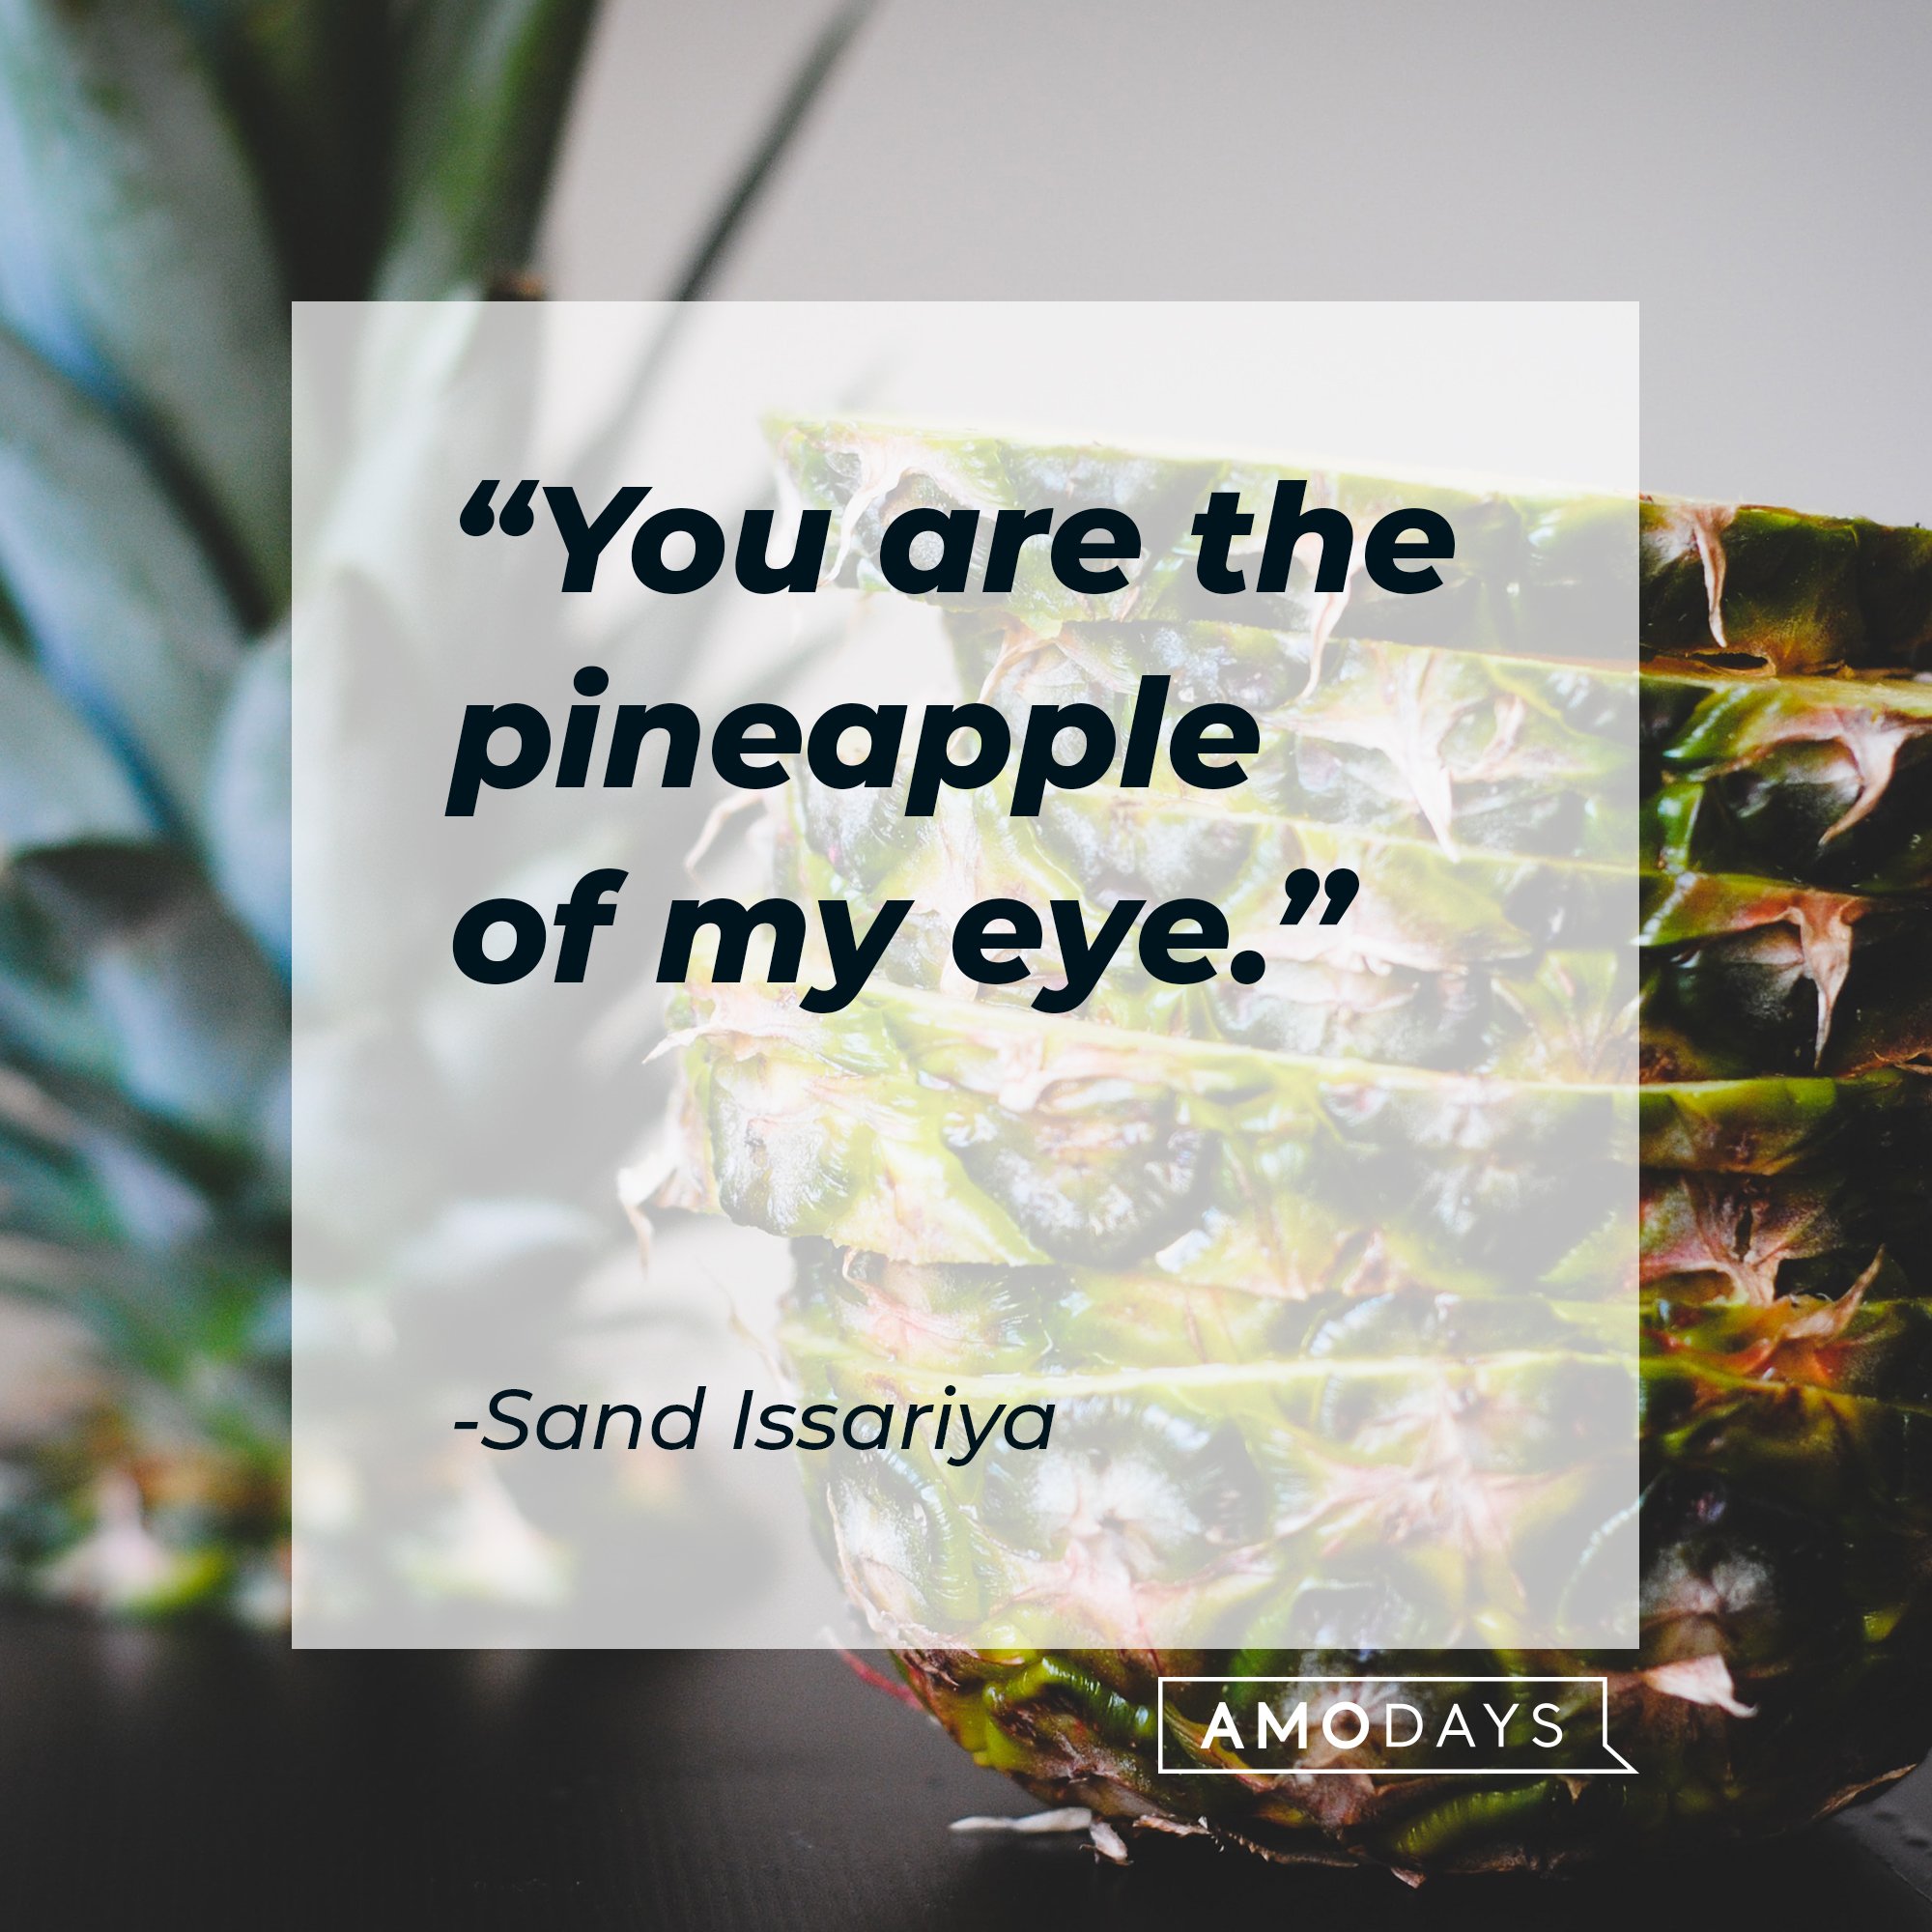 Sand Issariya's quote: "You are the pineapple of my eye." | Image: AmoDays